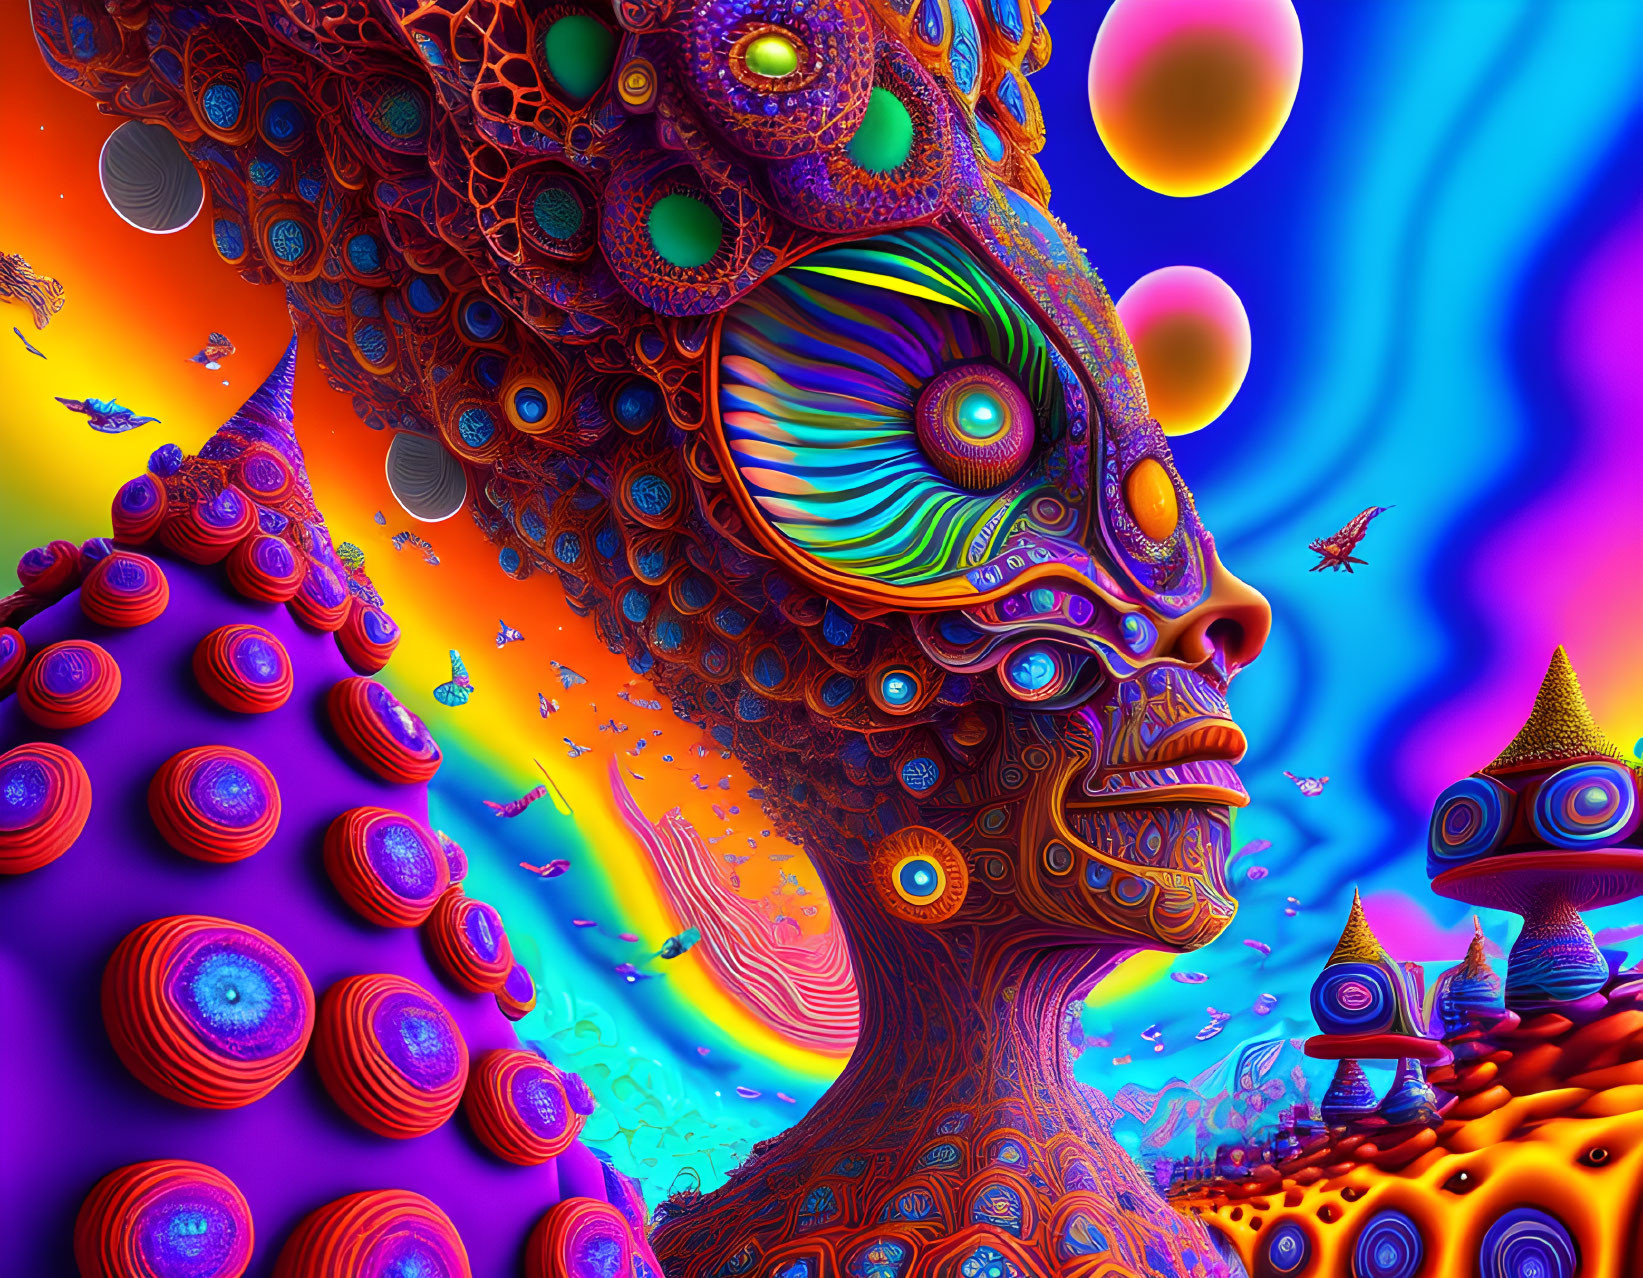 Surreal colorful alien landscape with humanoid figure